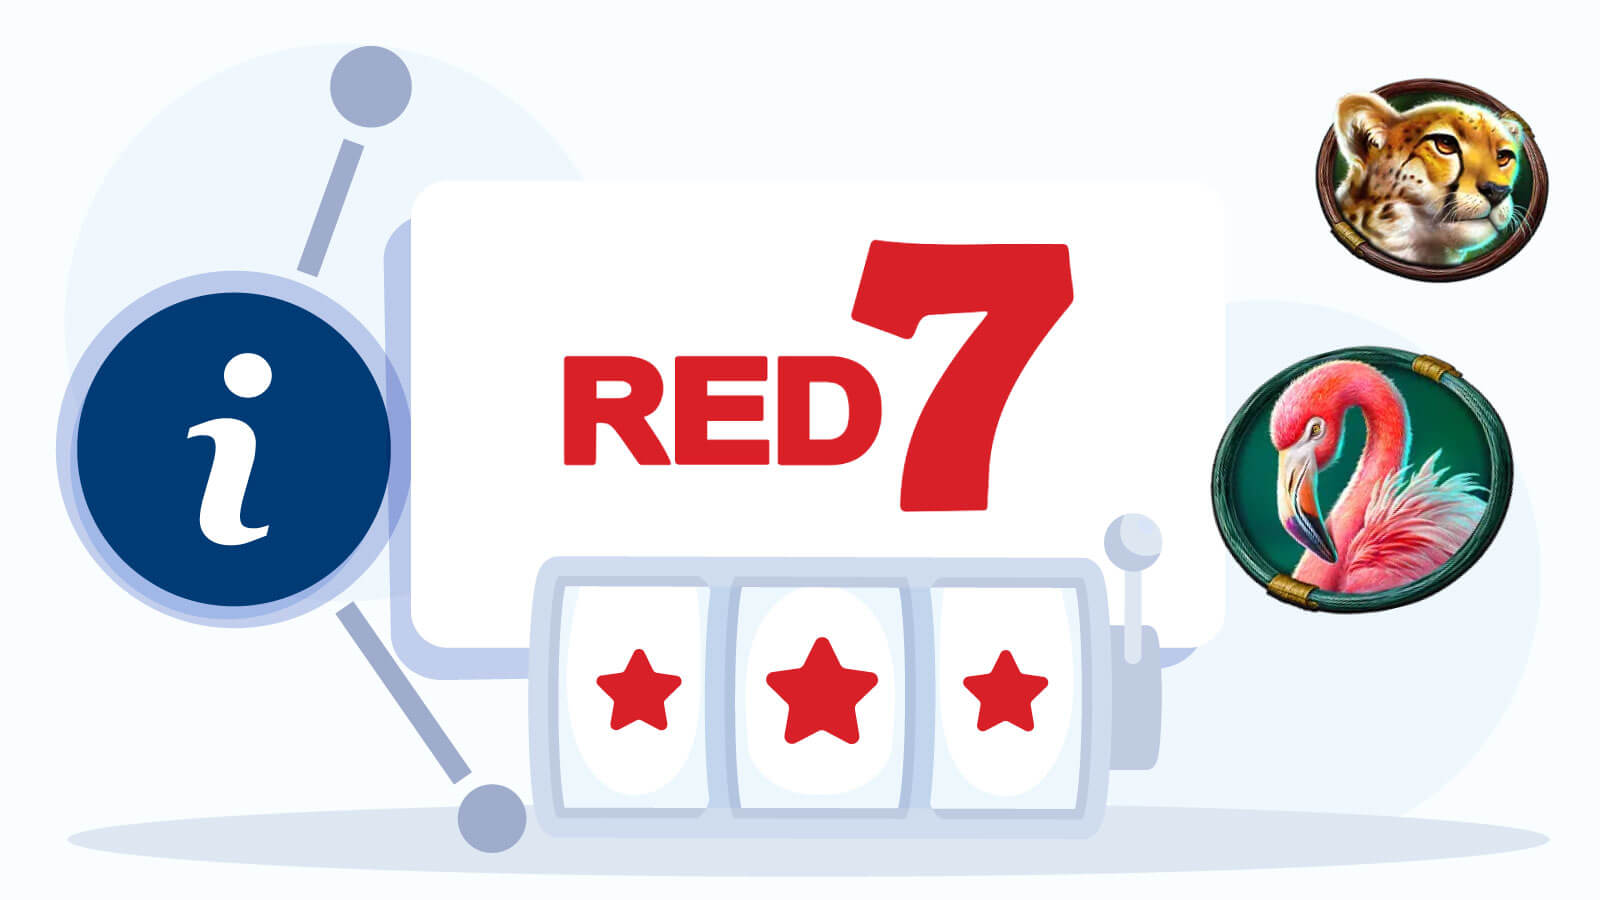 Introduction to Red7 Slots Provider – Who Owns It